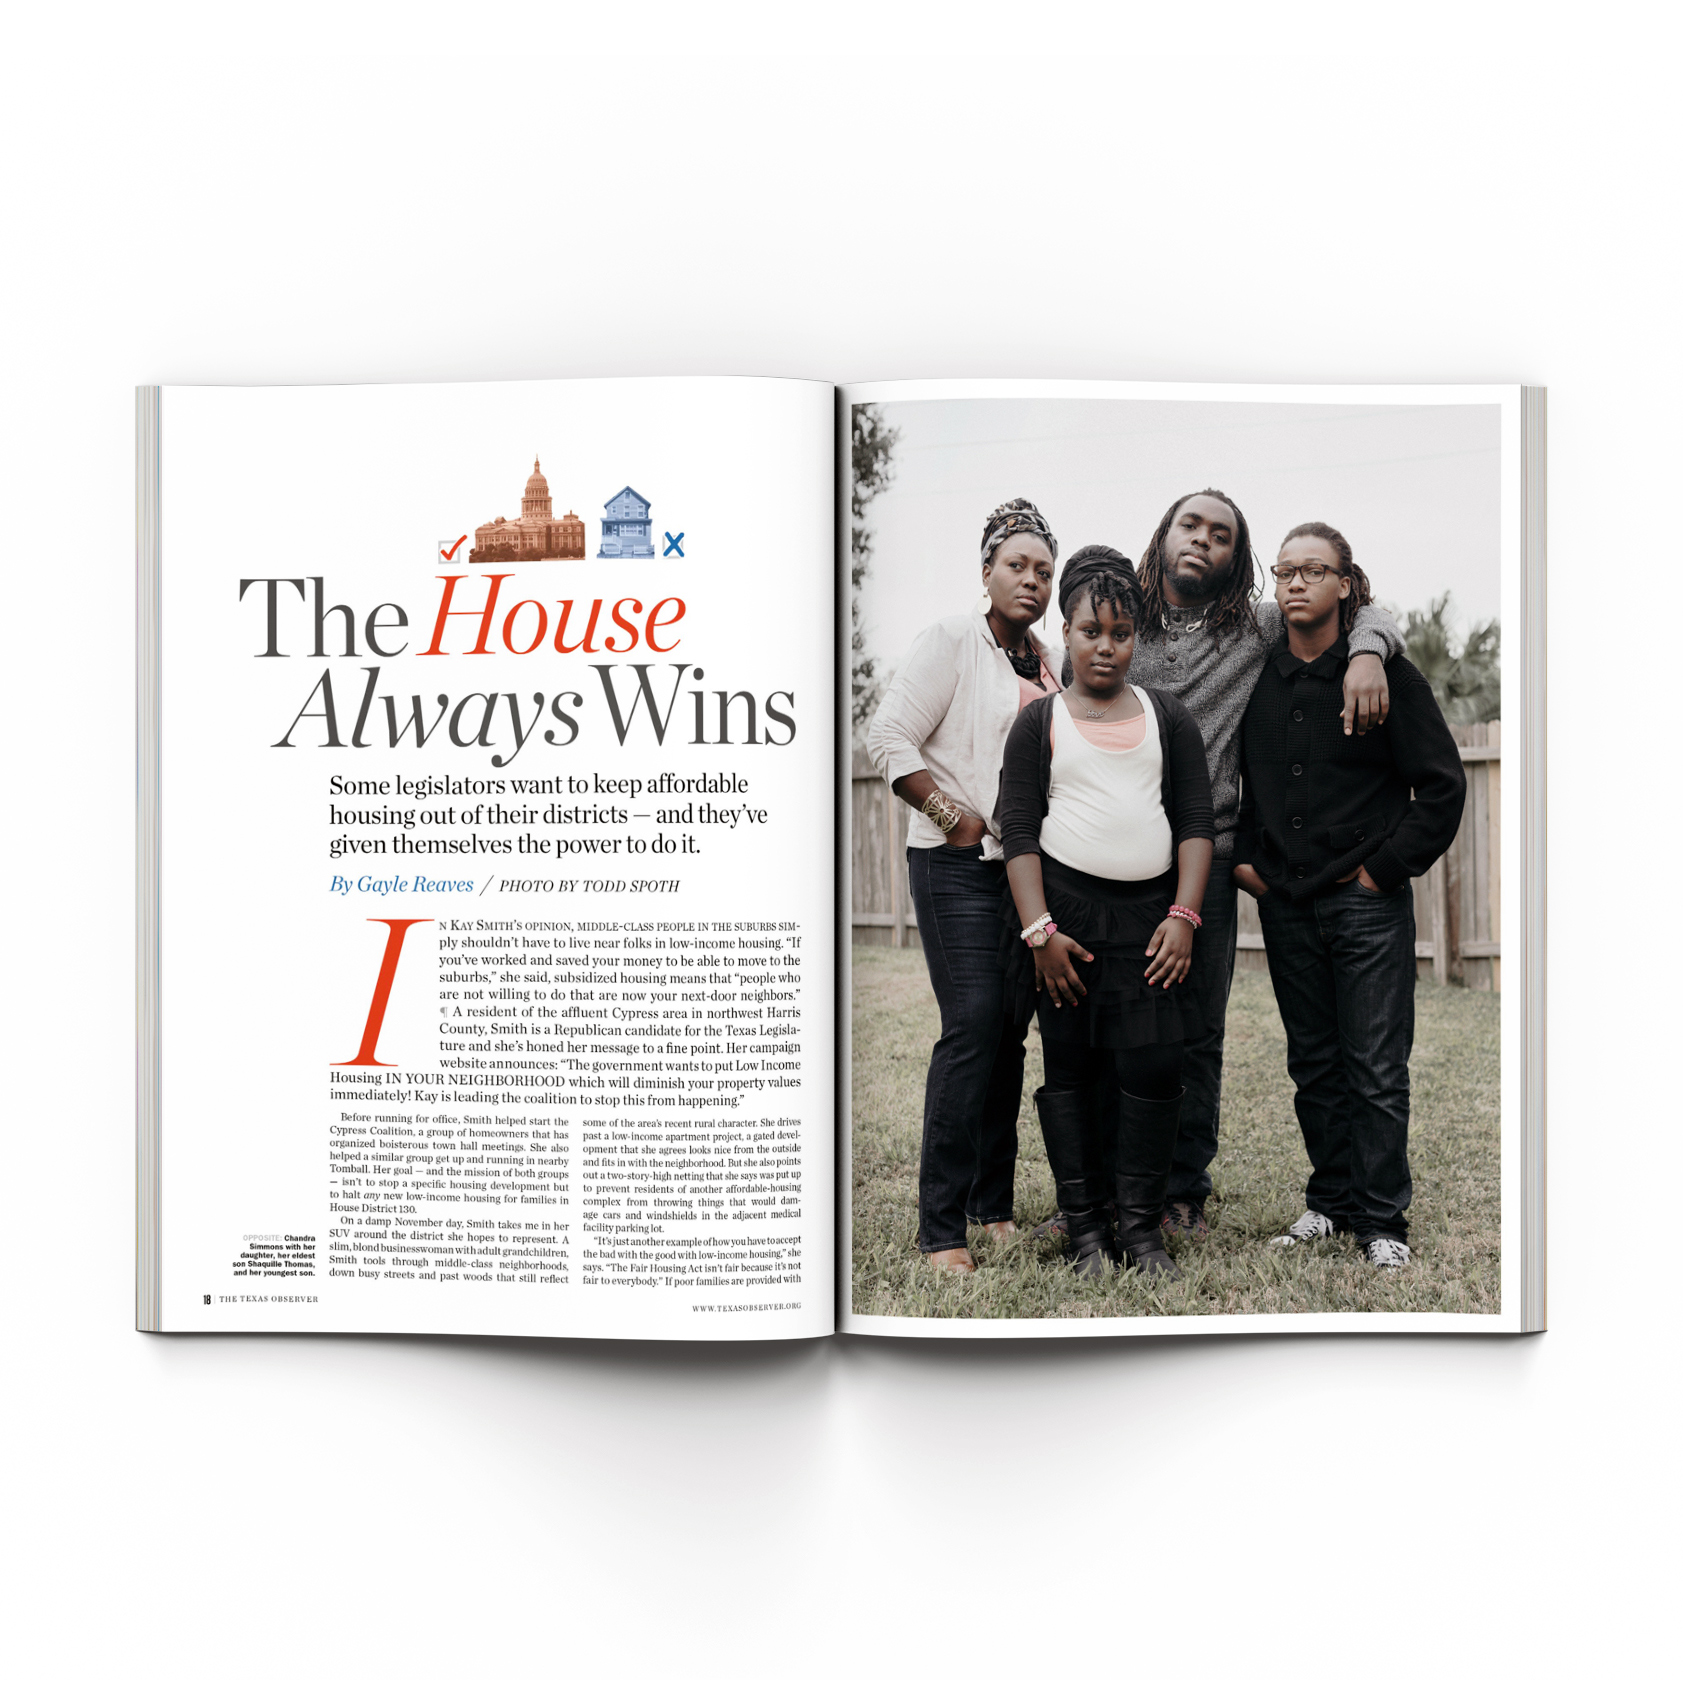 Chandra Simmons & family, photographed at their Sugarland, Texas home by photographer, Todd Spoth.